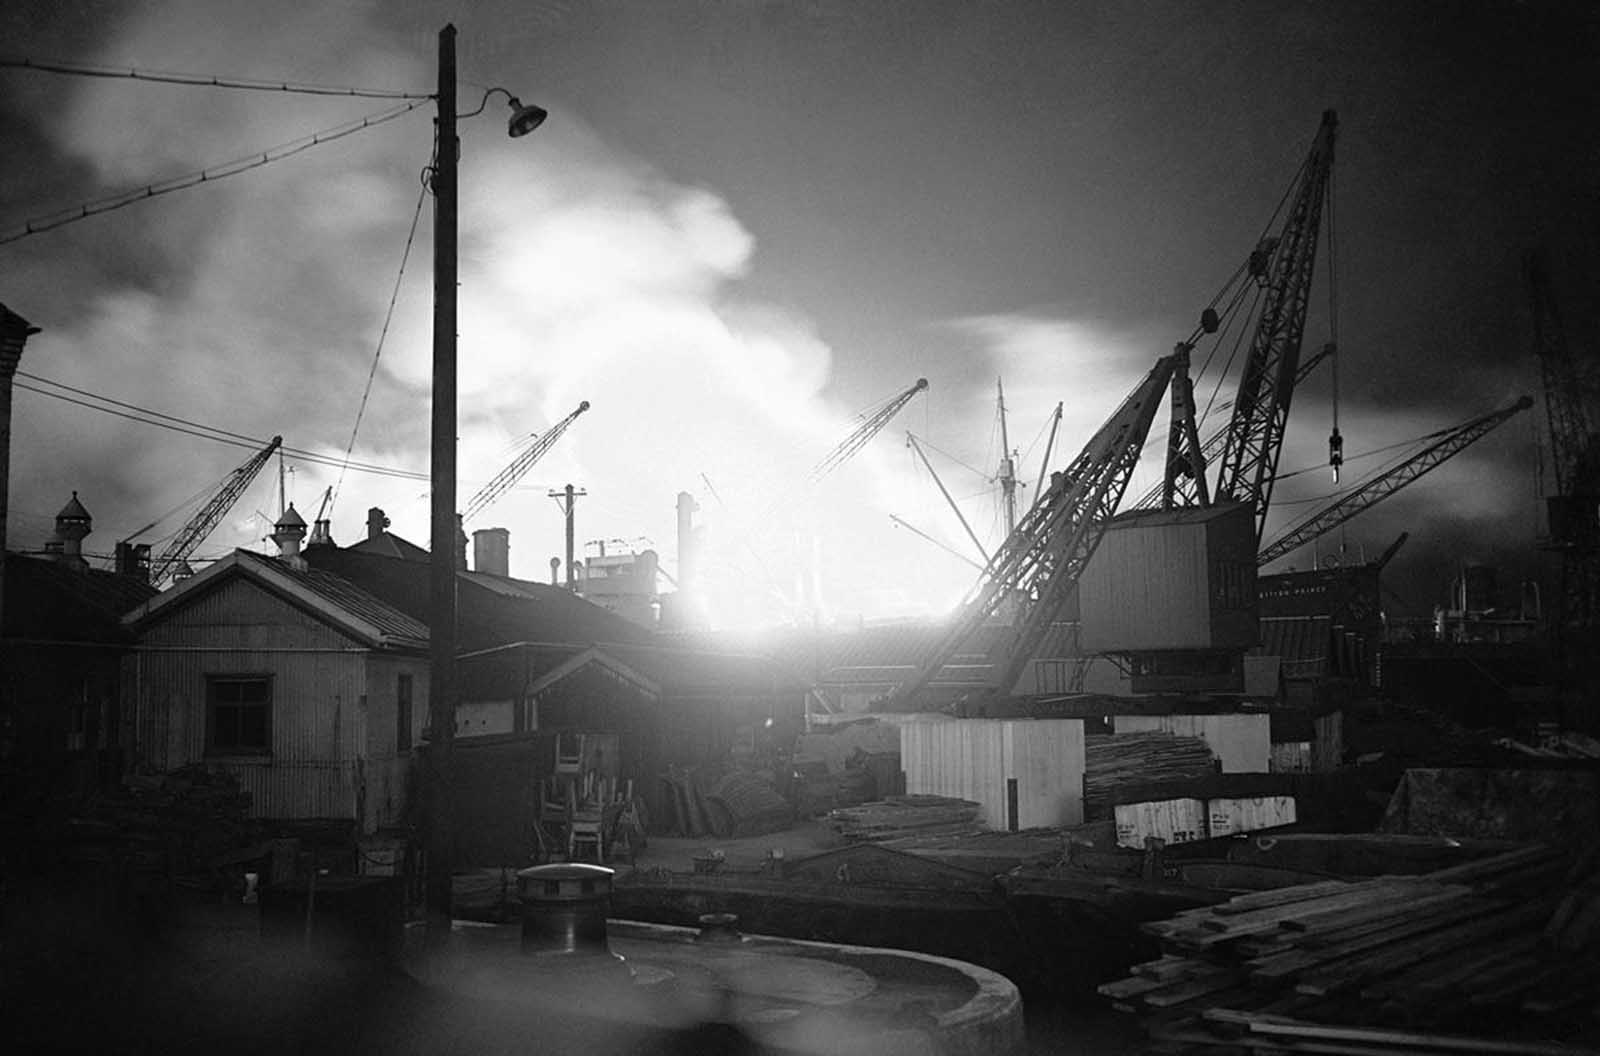 One of many fires started in Surrey Commercial Dock, London, on September 7, 1940, after a heavy raid during the night by German bombers.